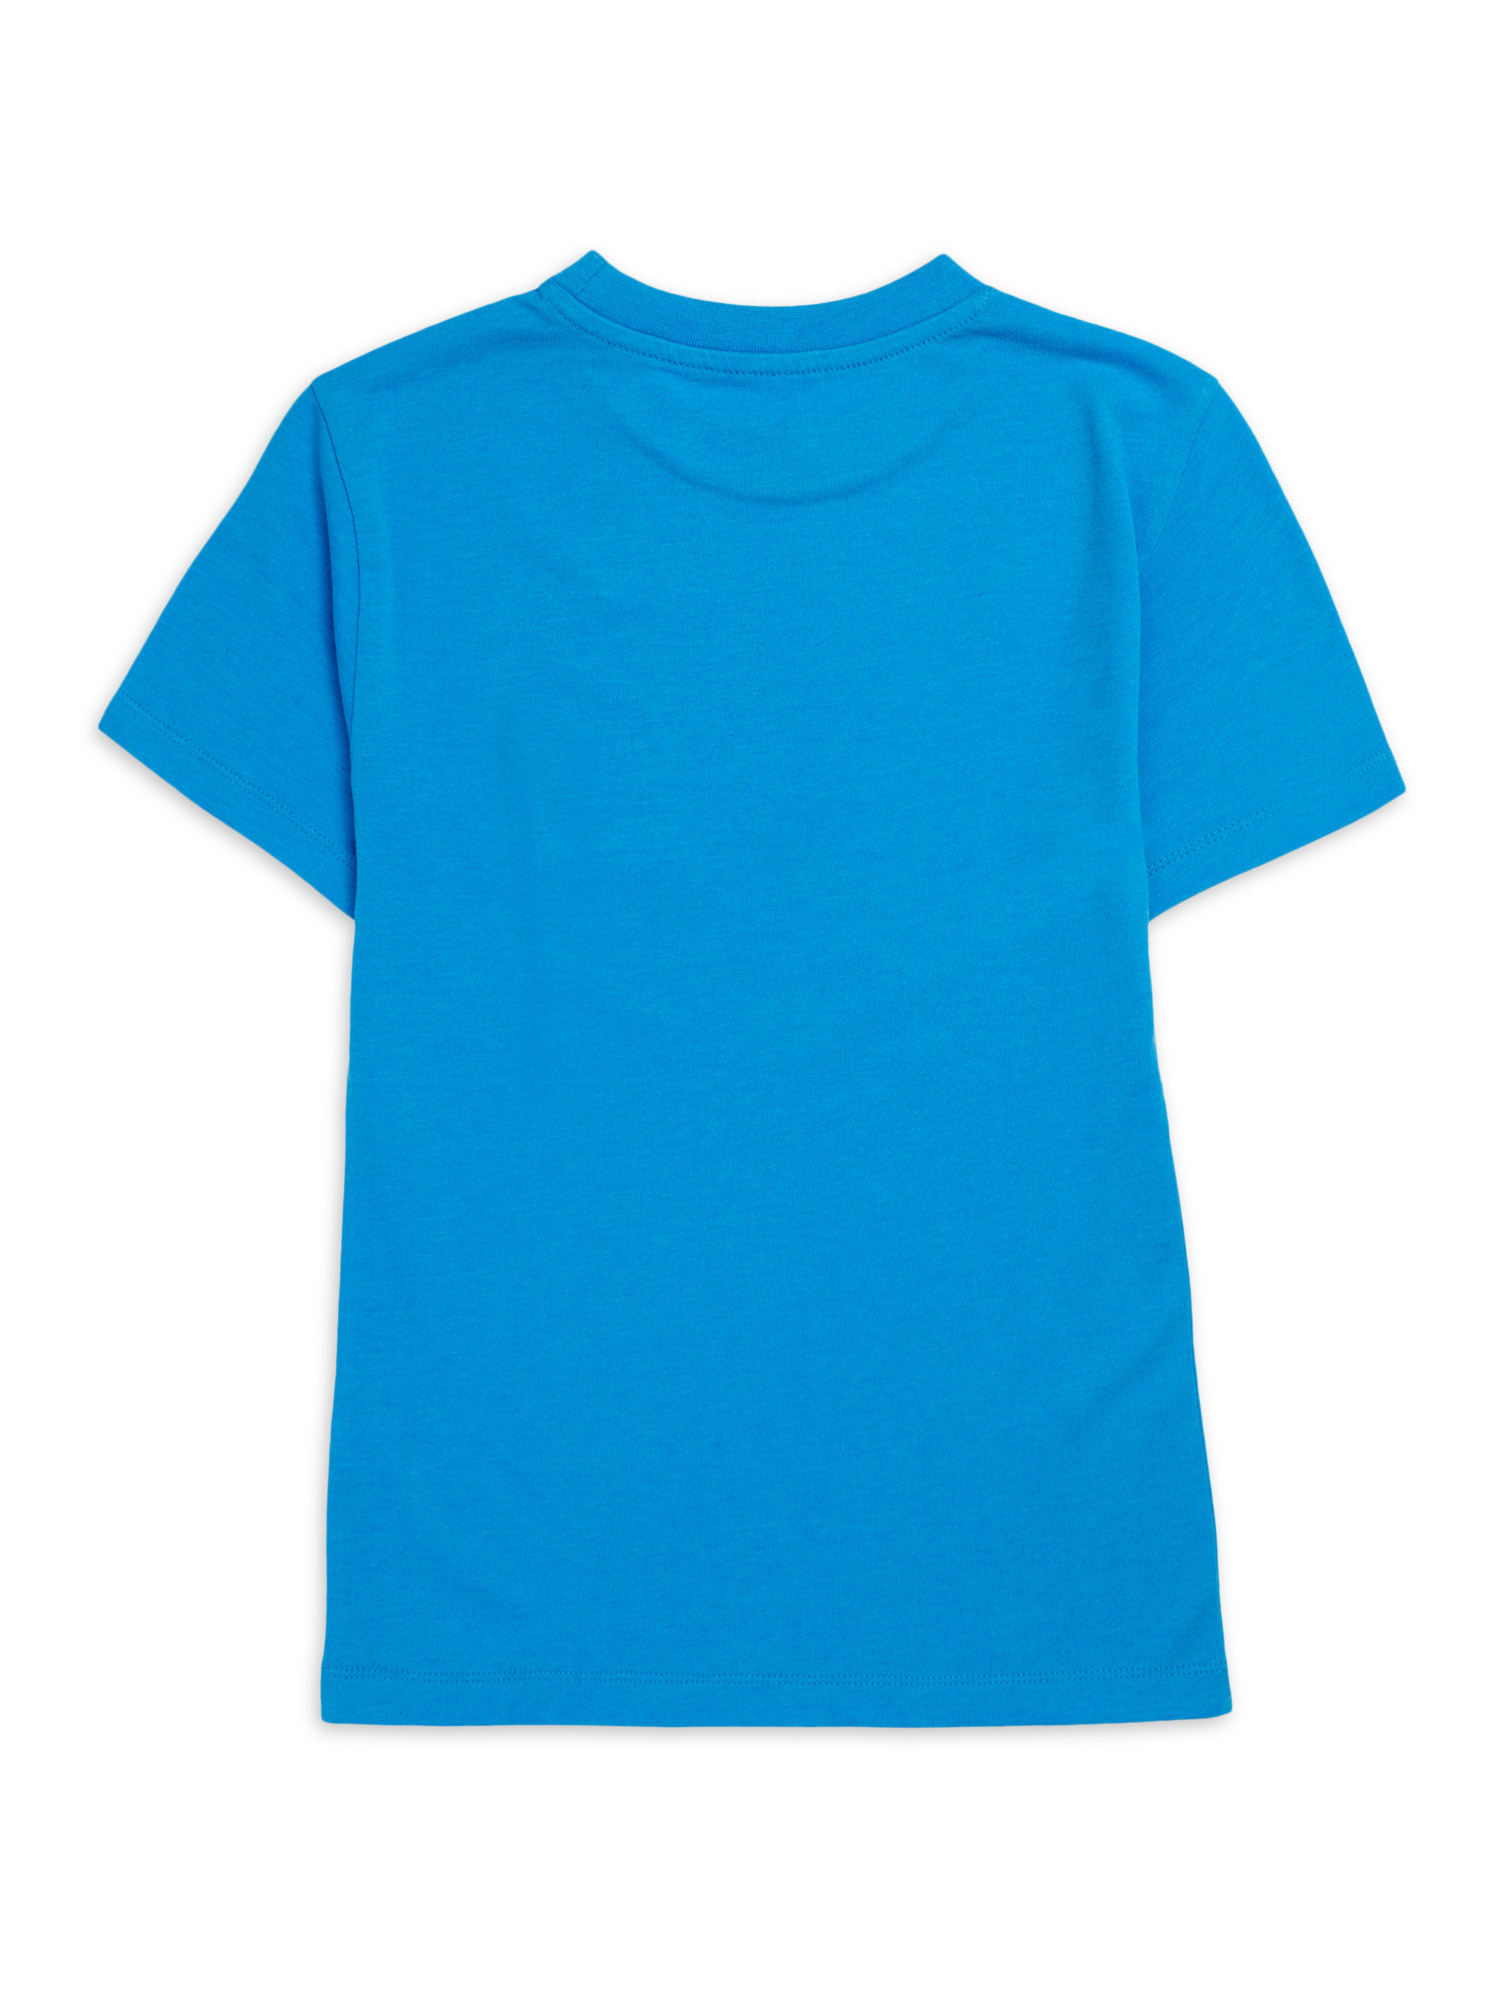 US Polo Assn. Short Sleeve Pullover Classic Fit T-Shirt (Little Boys or Big Boys) 3 Pack - image 3 of 4